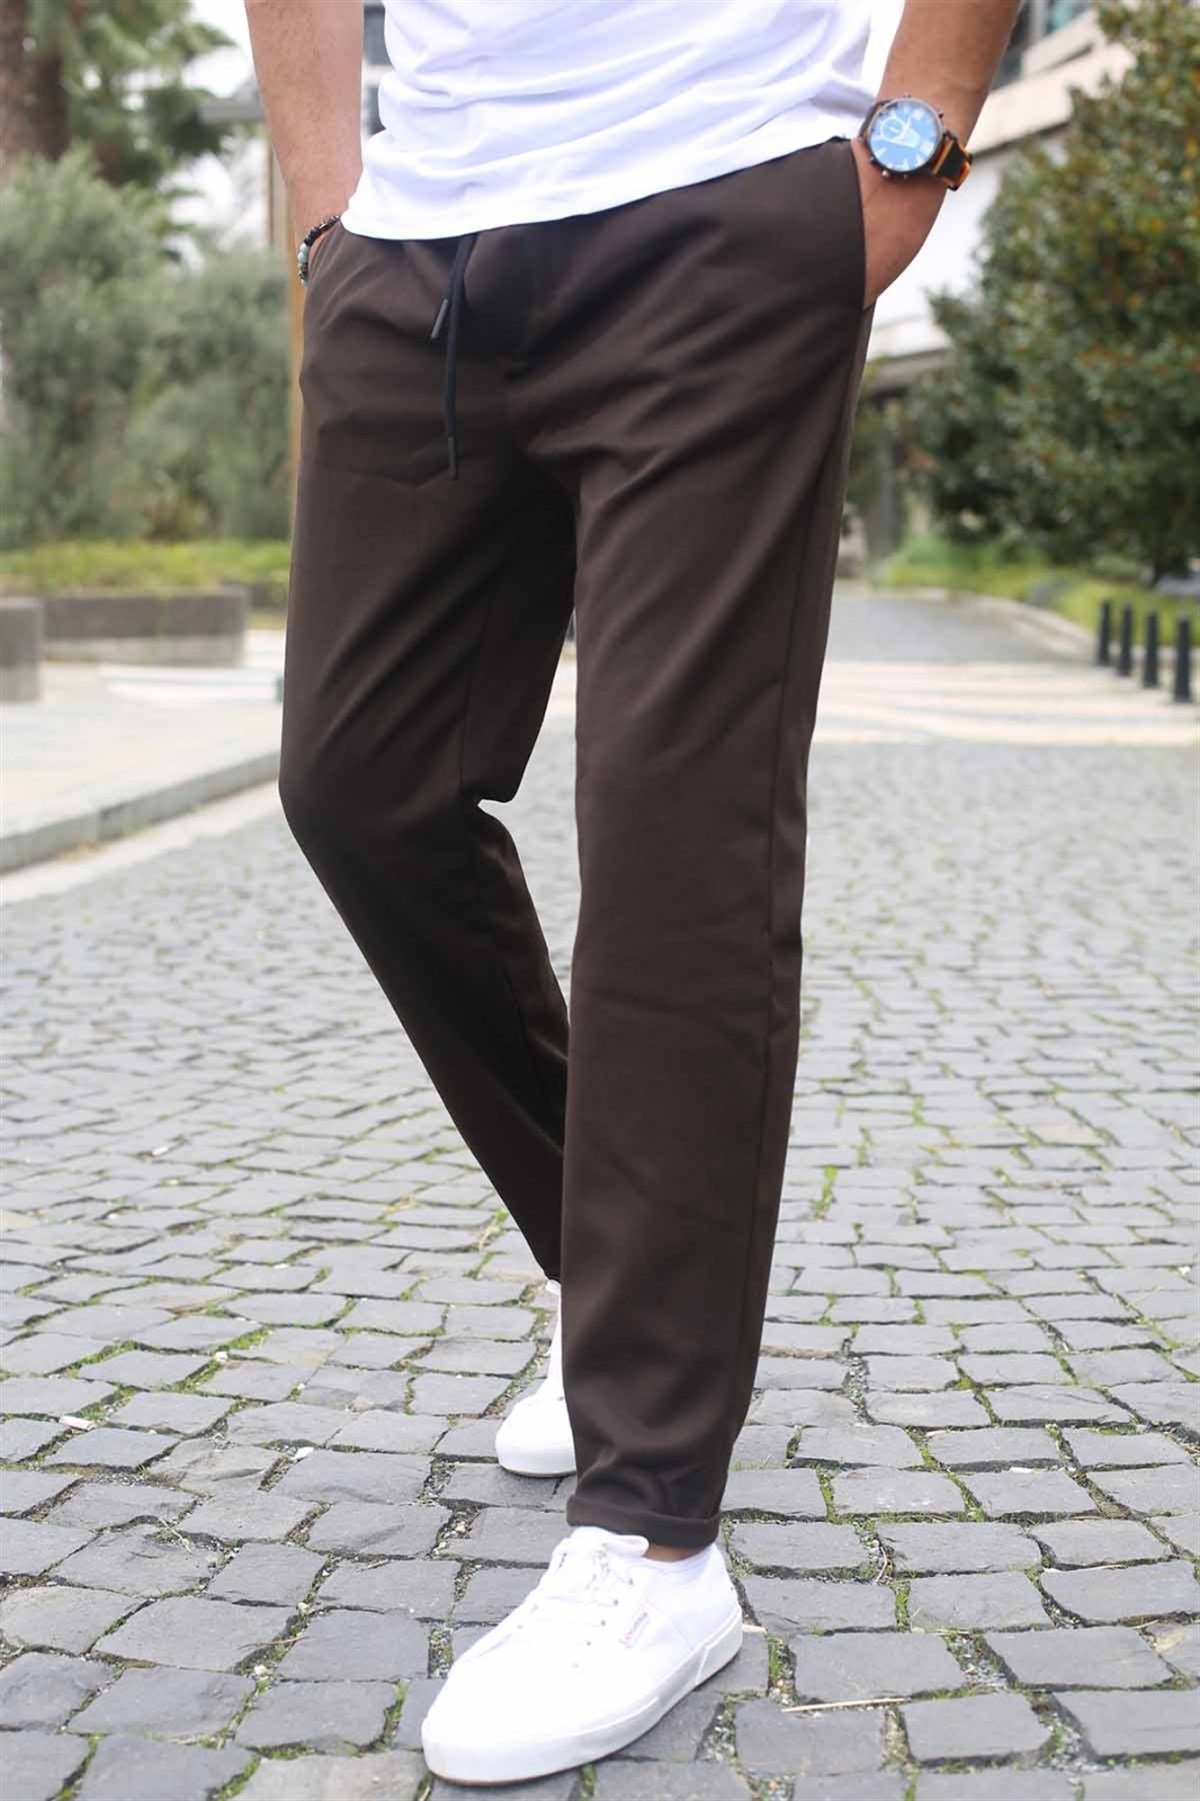 Mens Brown Cotton Joggers at Rs 225/piece